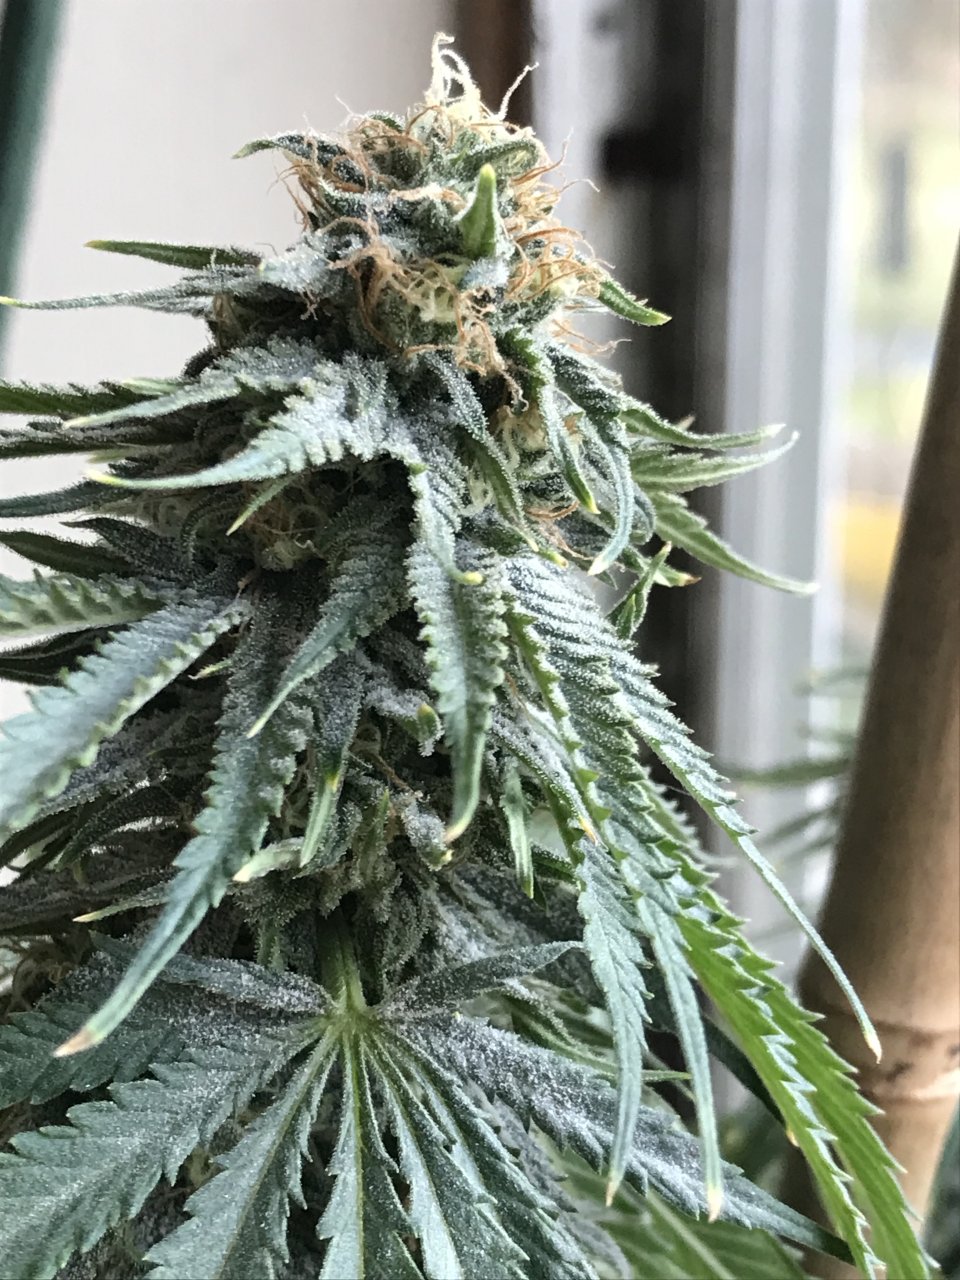 Girl Scout Cookies (Gina)-Day 31F-i.JPG